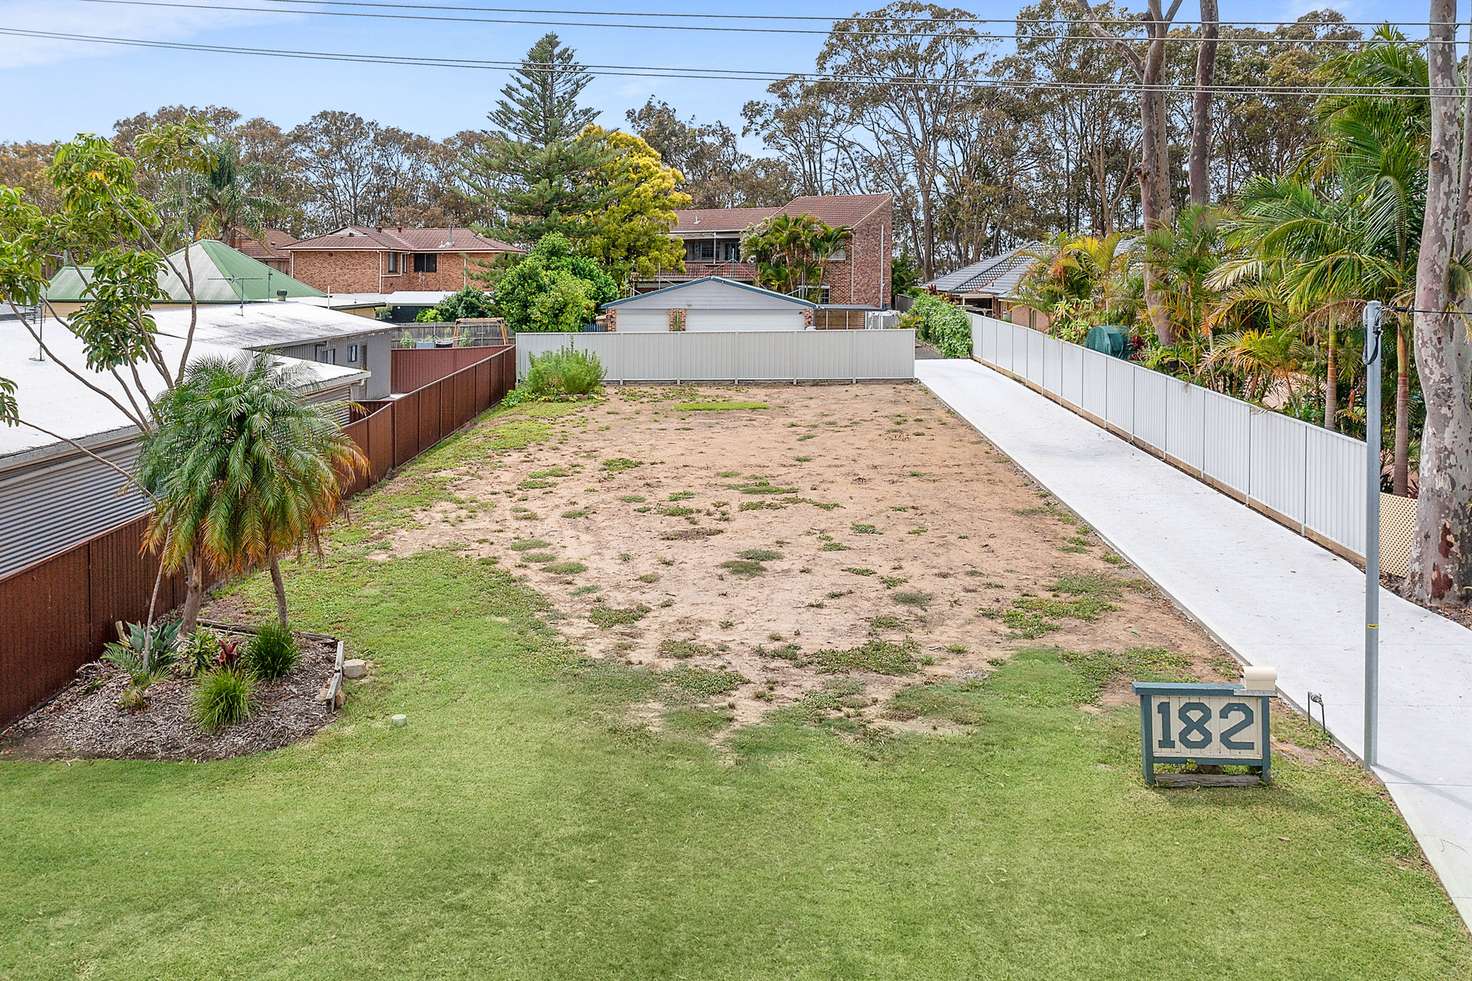 Main view of Homely residentialLand listing, 182a Tuggerawong Road, Tuggerawong NSW 2259